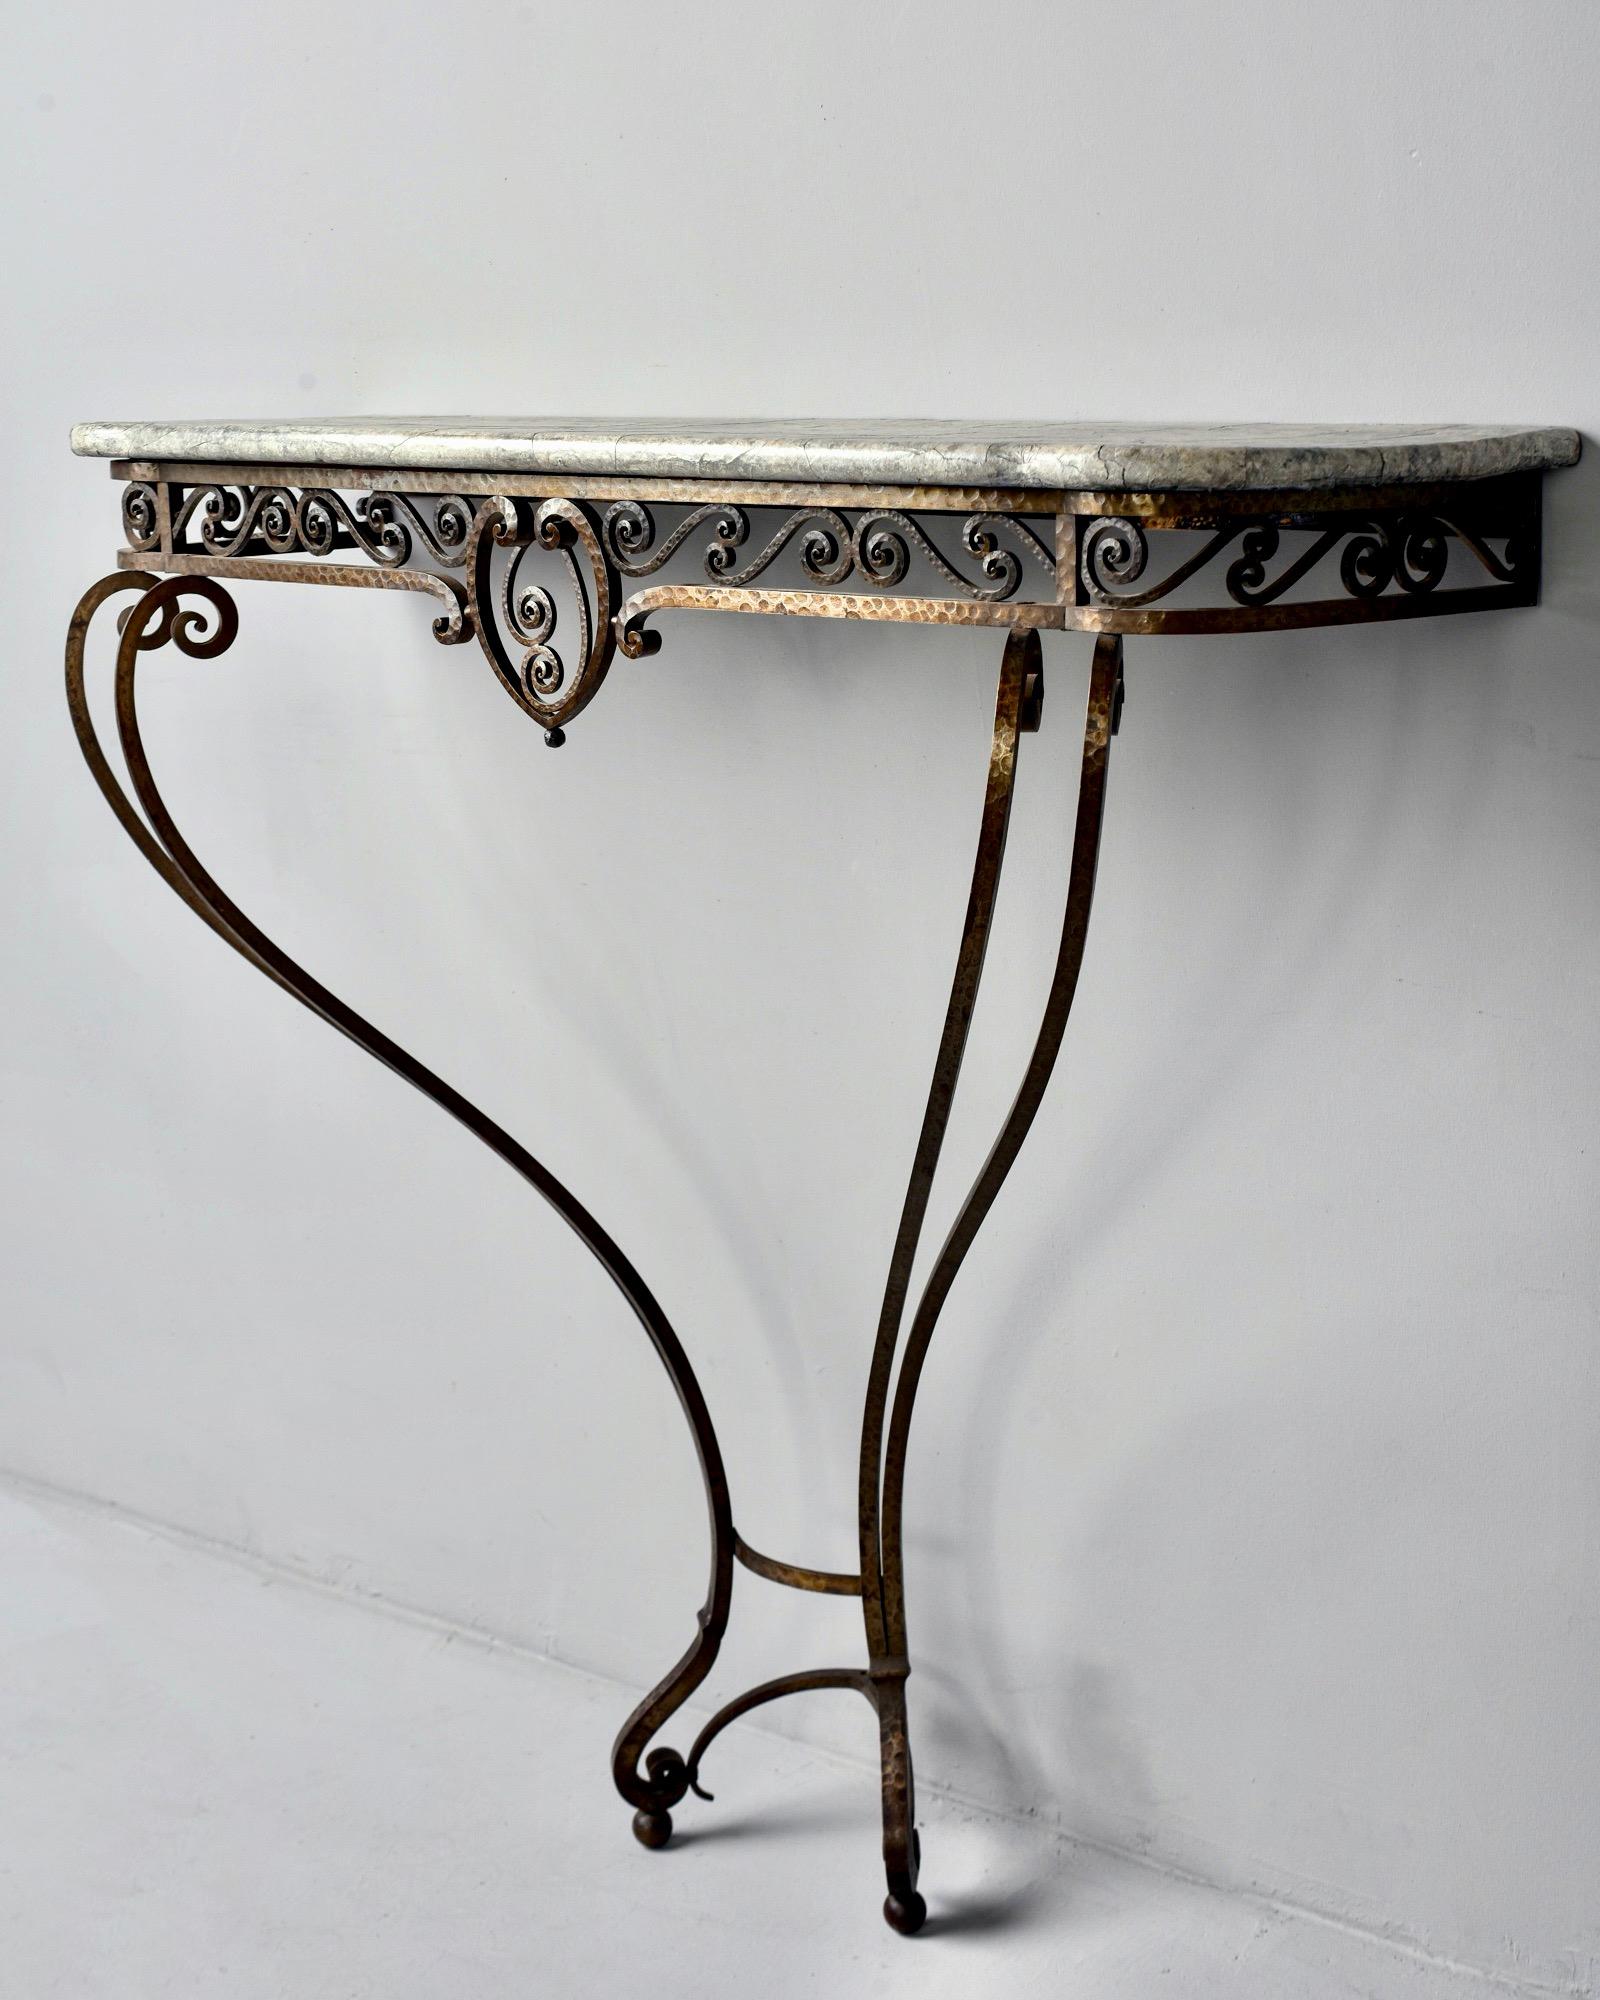 French Art Deco wall-mounted console features a hand forged, hammered iron base with lots of scroll work, circa 1930s. Top is wood with faux painted finish to mimic marble. Unknown maker.